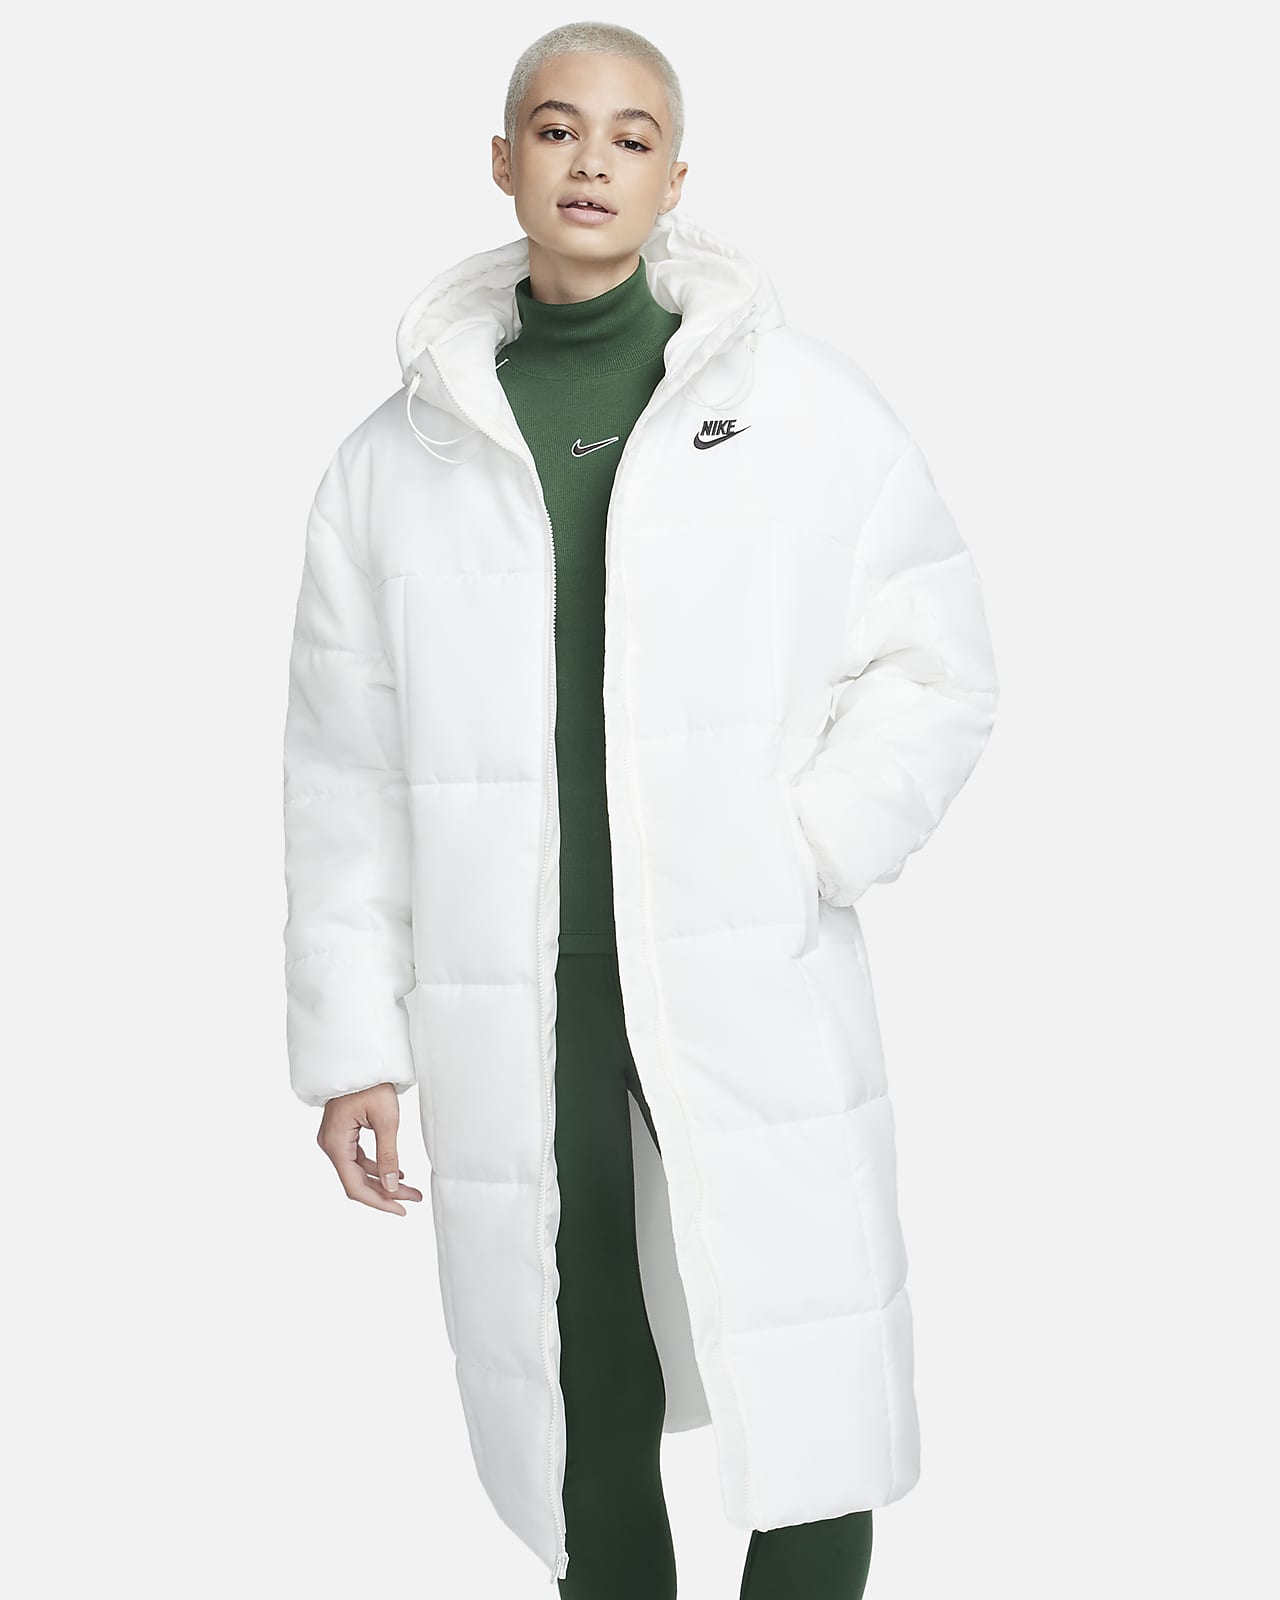 Nike Classic Puffer Jacket – DTLR